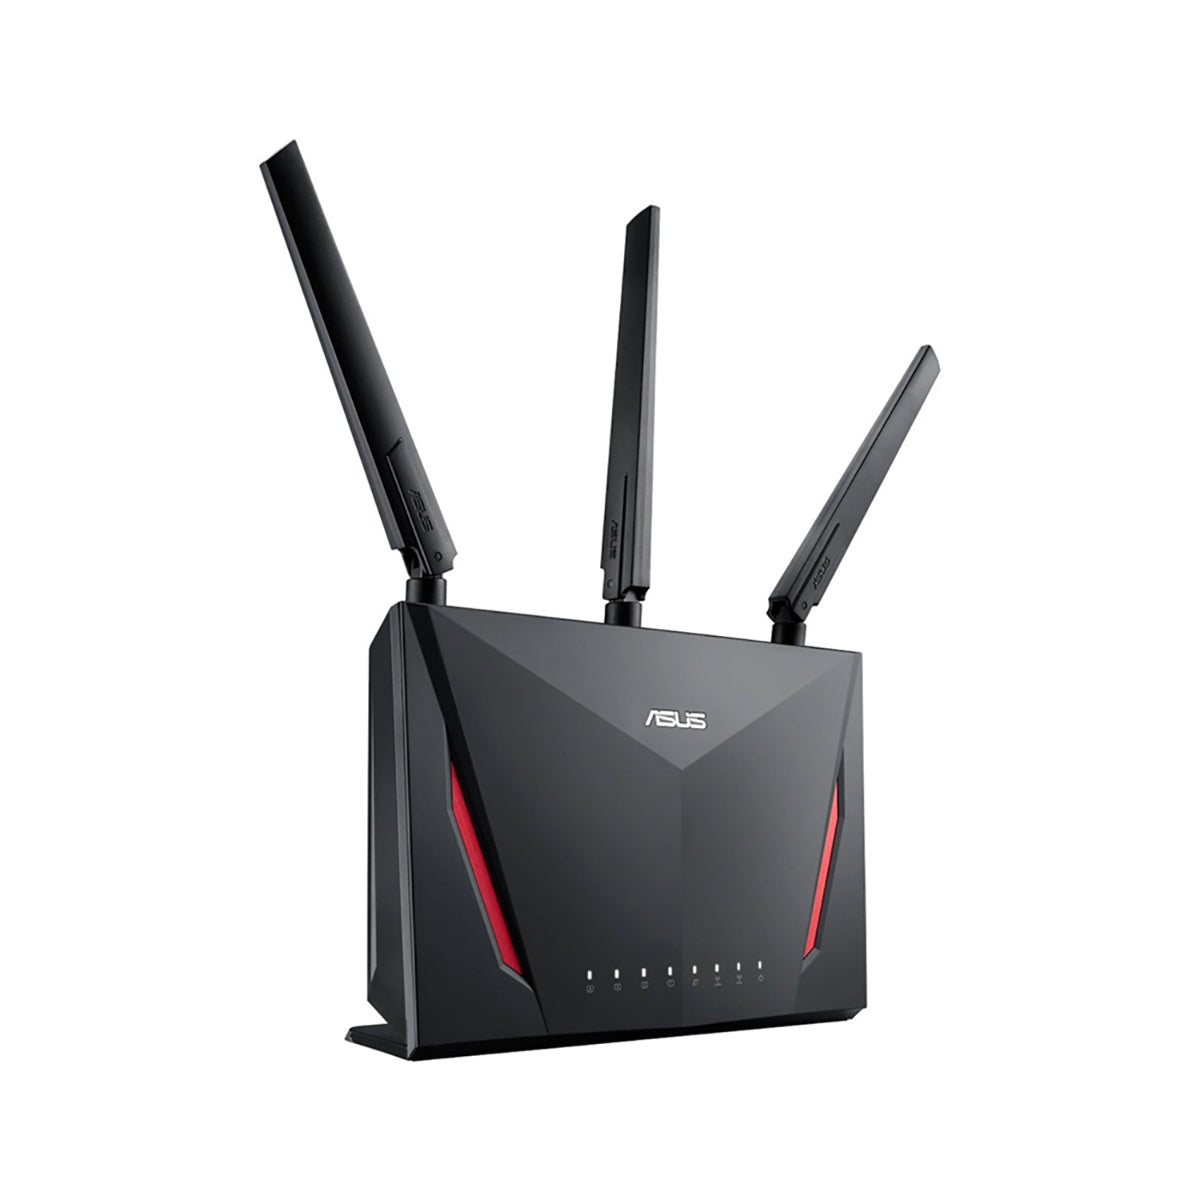 ROUTER ASUS DUAL BAND 3 ANTENAS AC2900 2.4GHZ-750MBPS 5.0GHZ-2167MBPS RT-AC86U